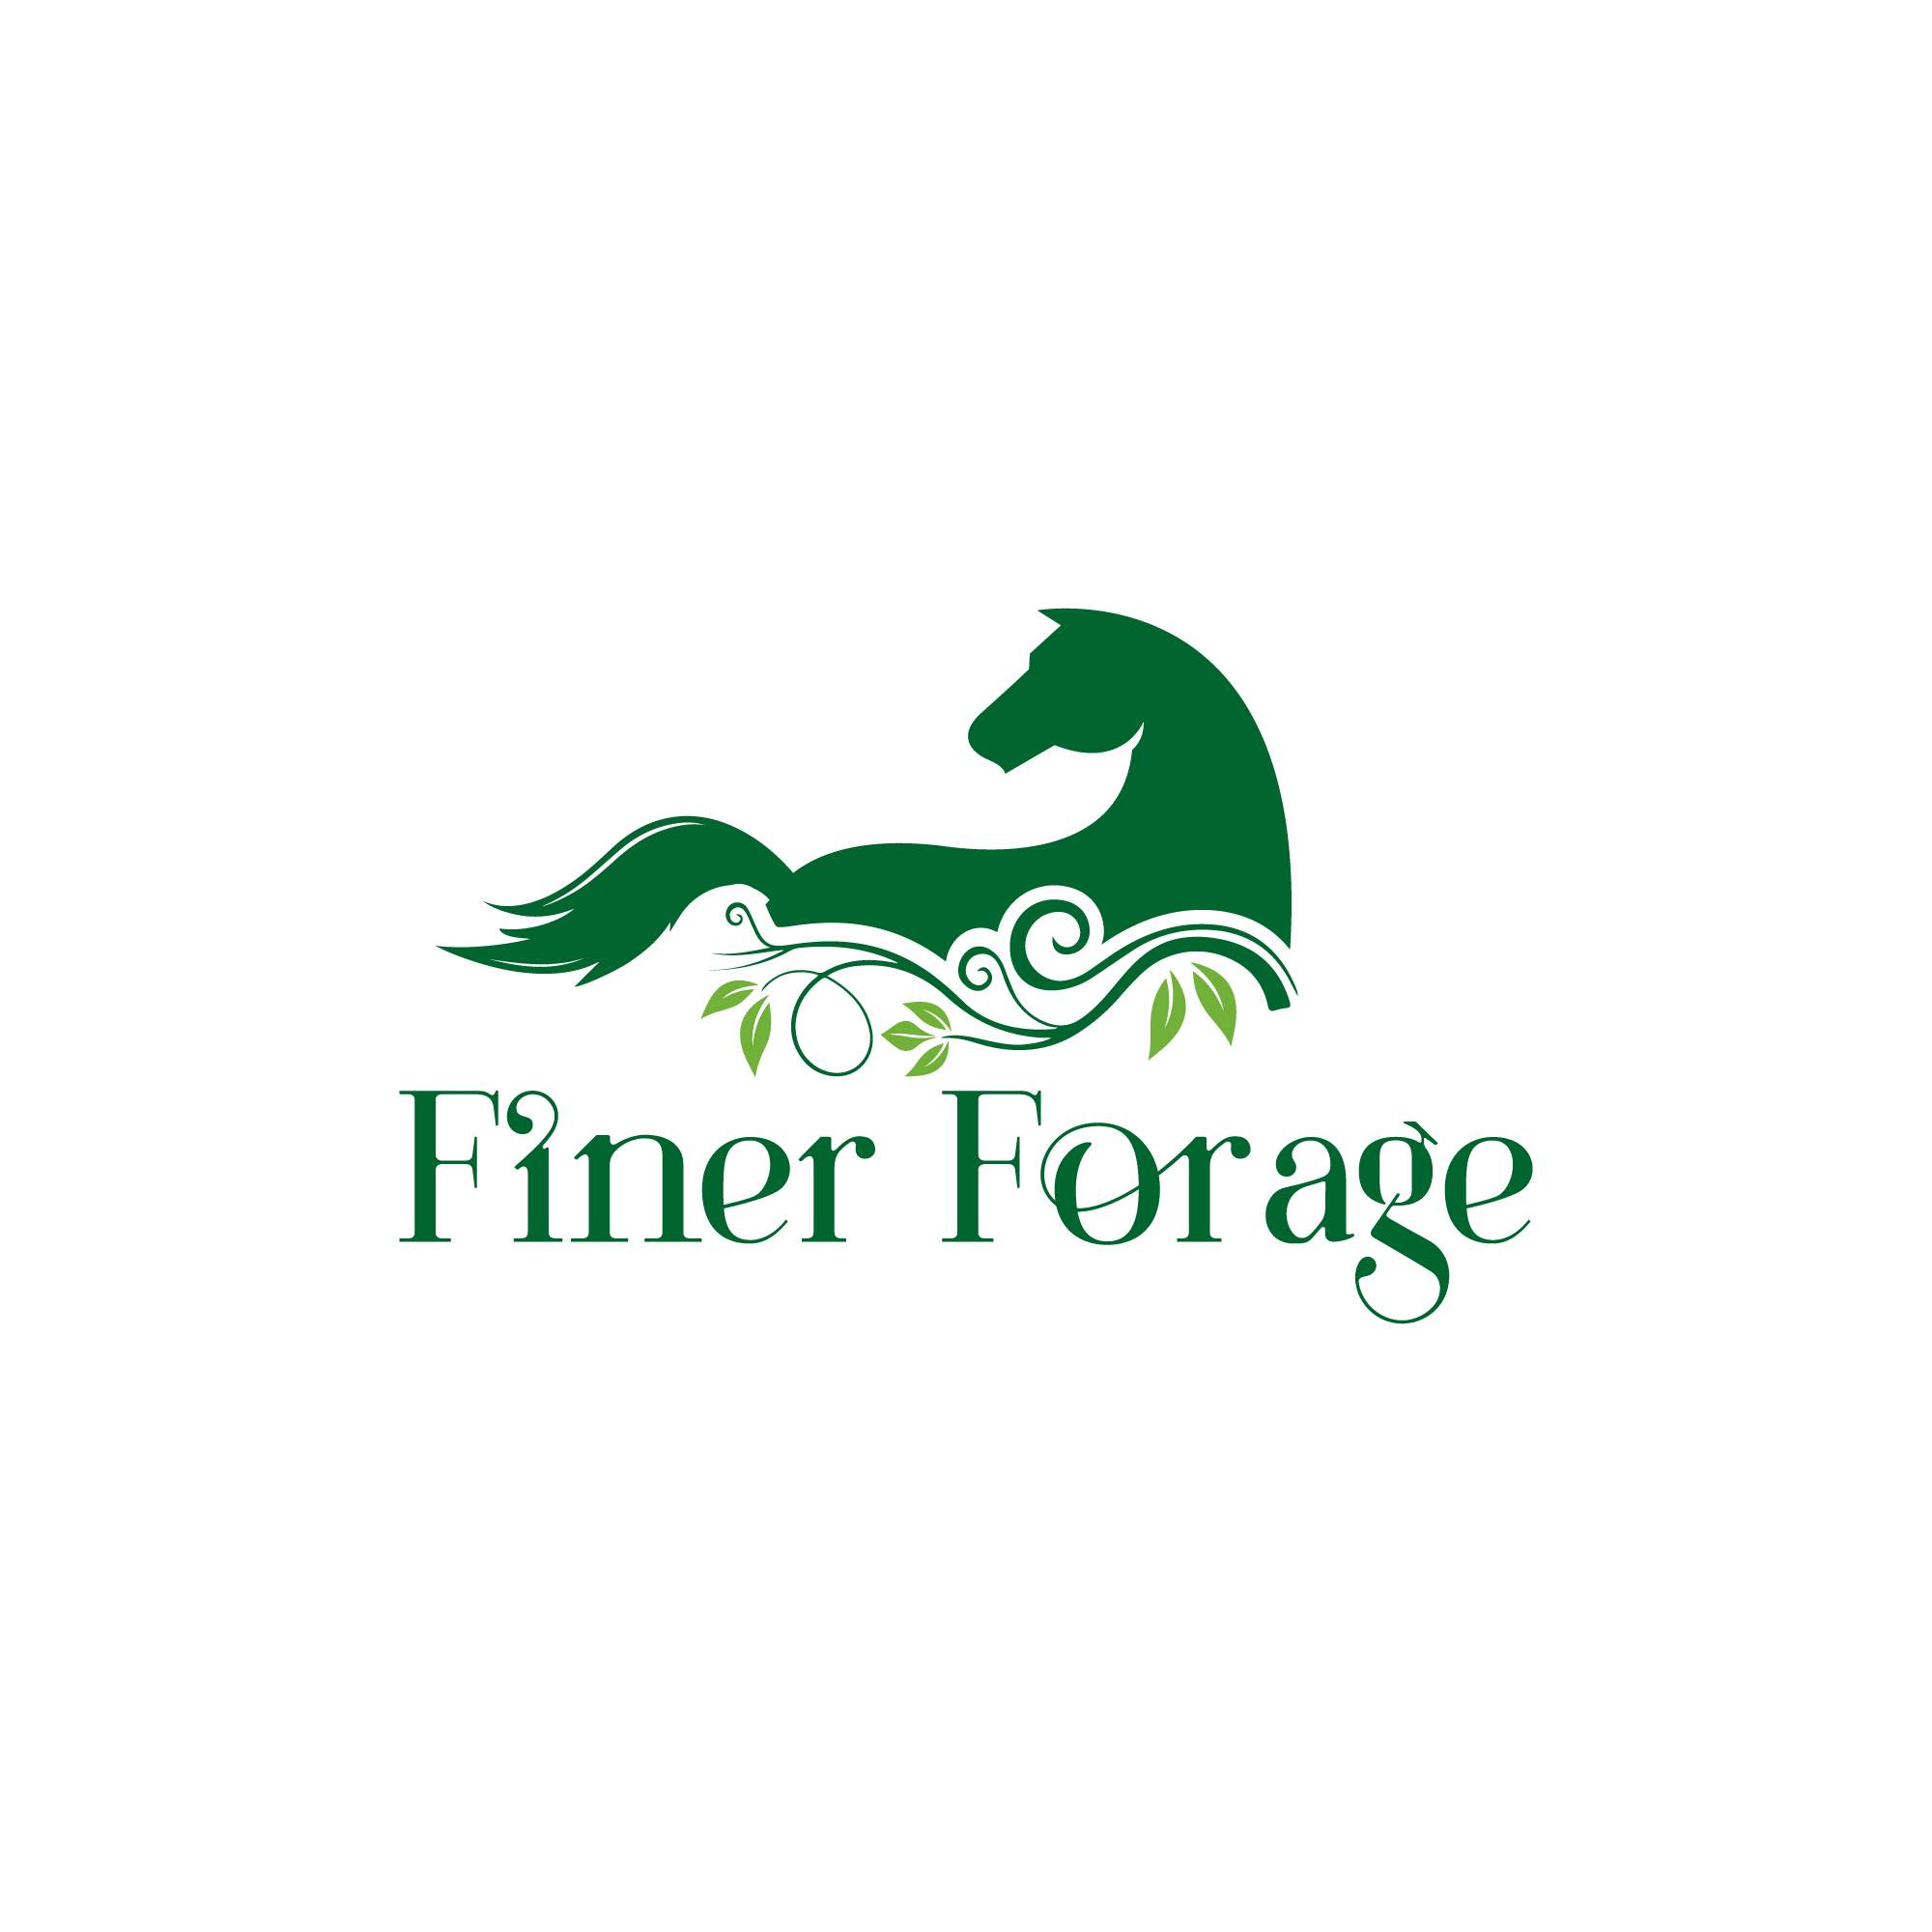 side view silhouette of a horse in green above Finer Forage text also in green